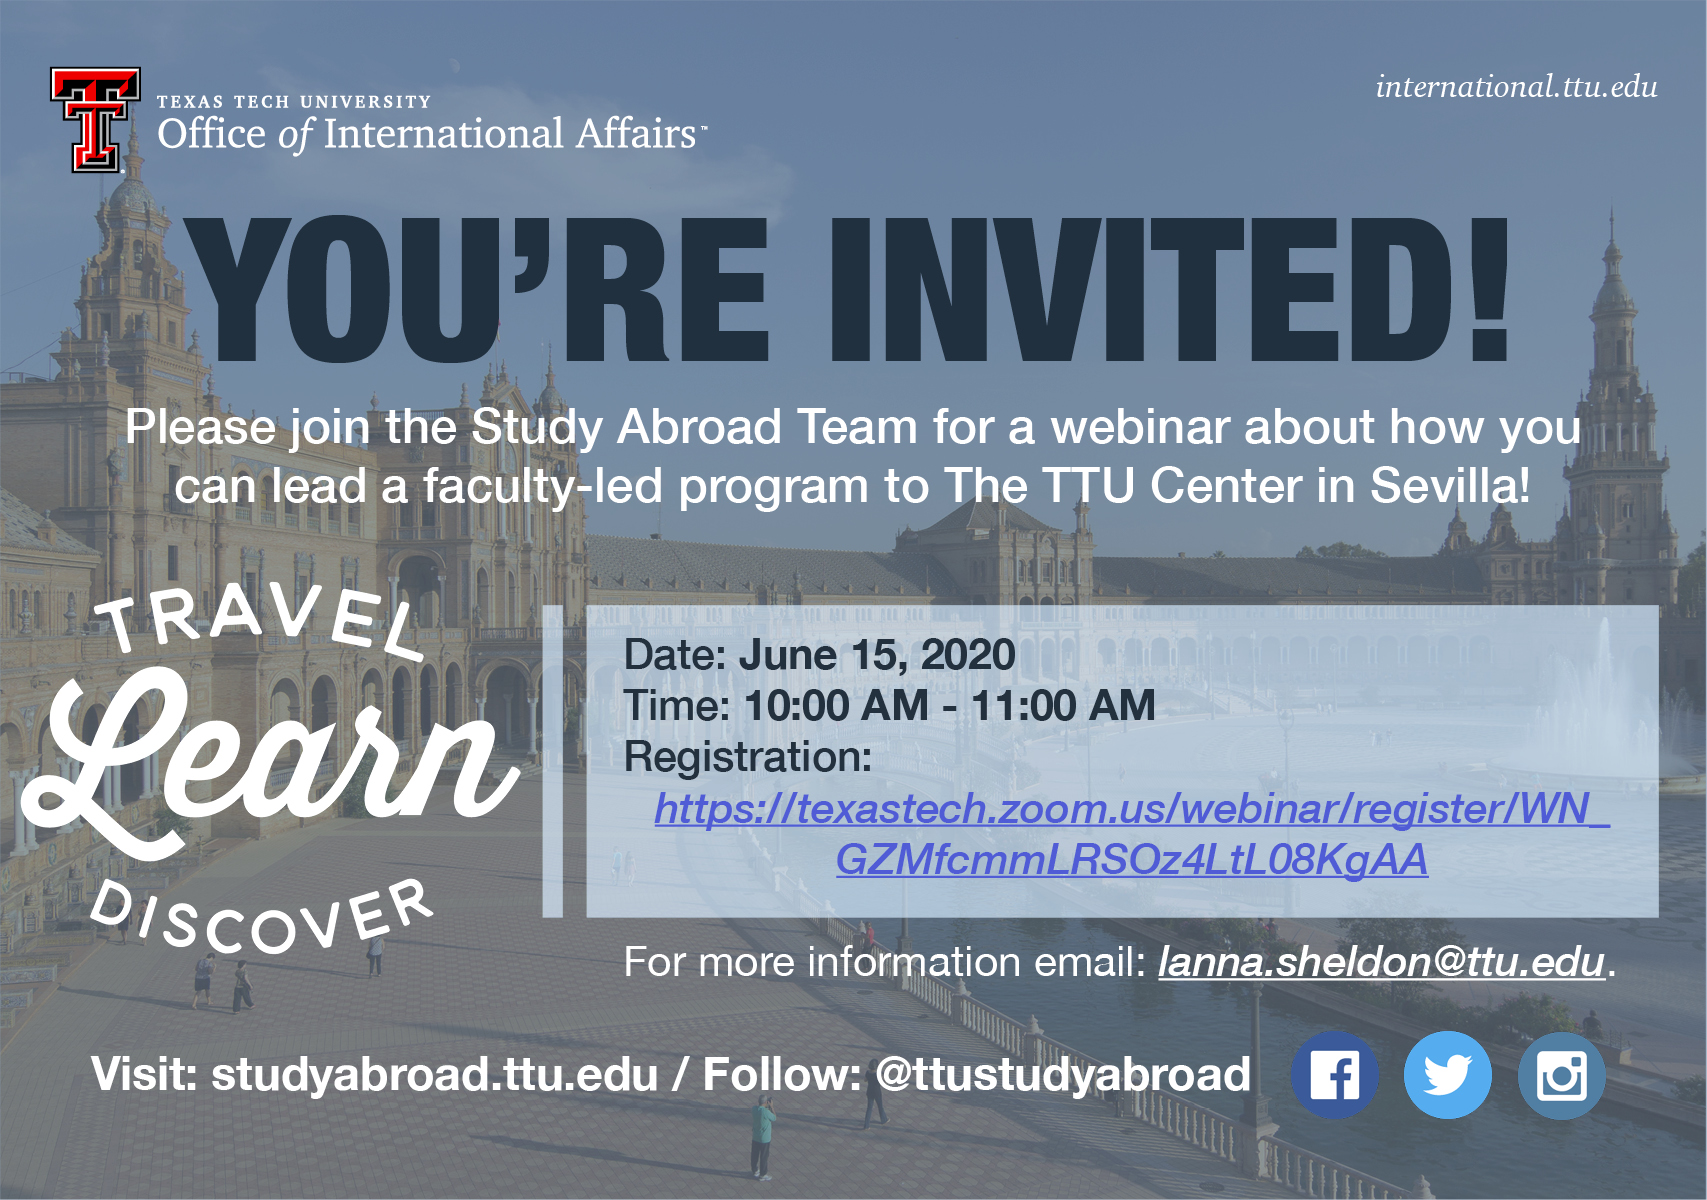 Invitation for webinar focused on how to lead students to the TTU Center in Sevilla, Spain